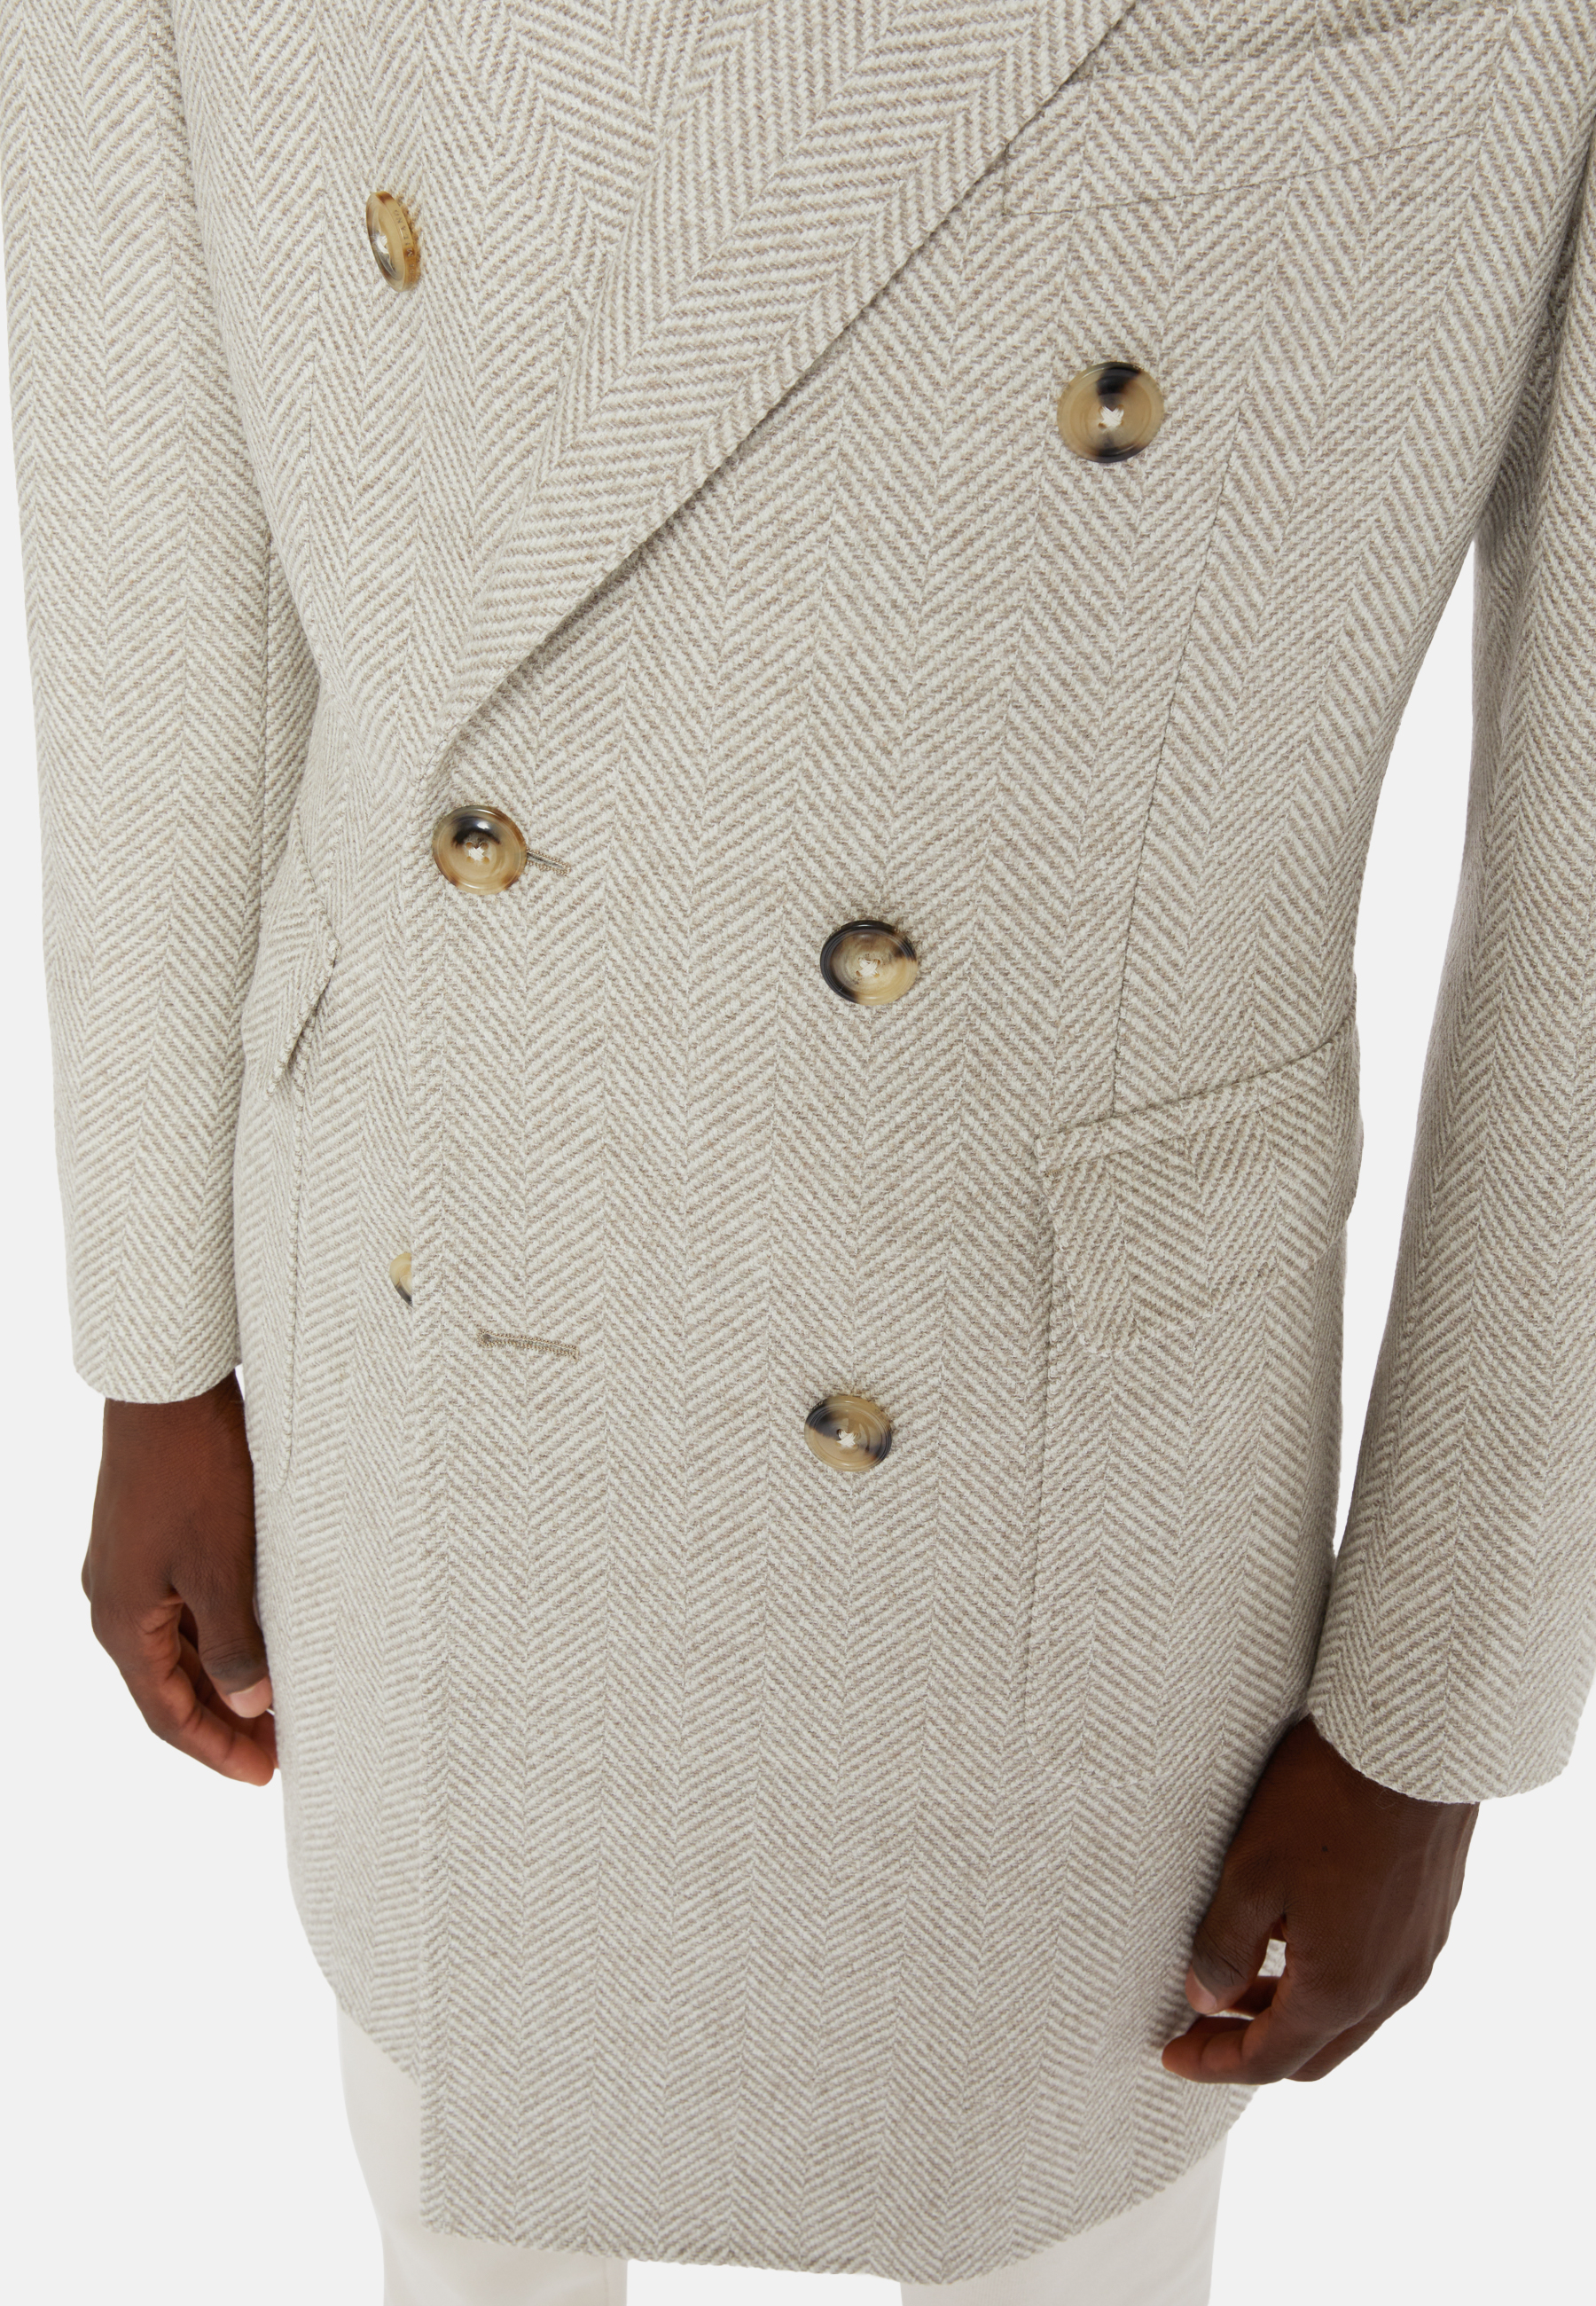 Long Double-Breasted Wool Coat